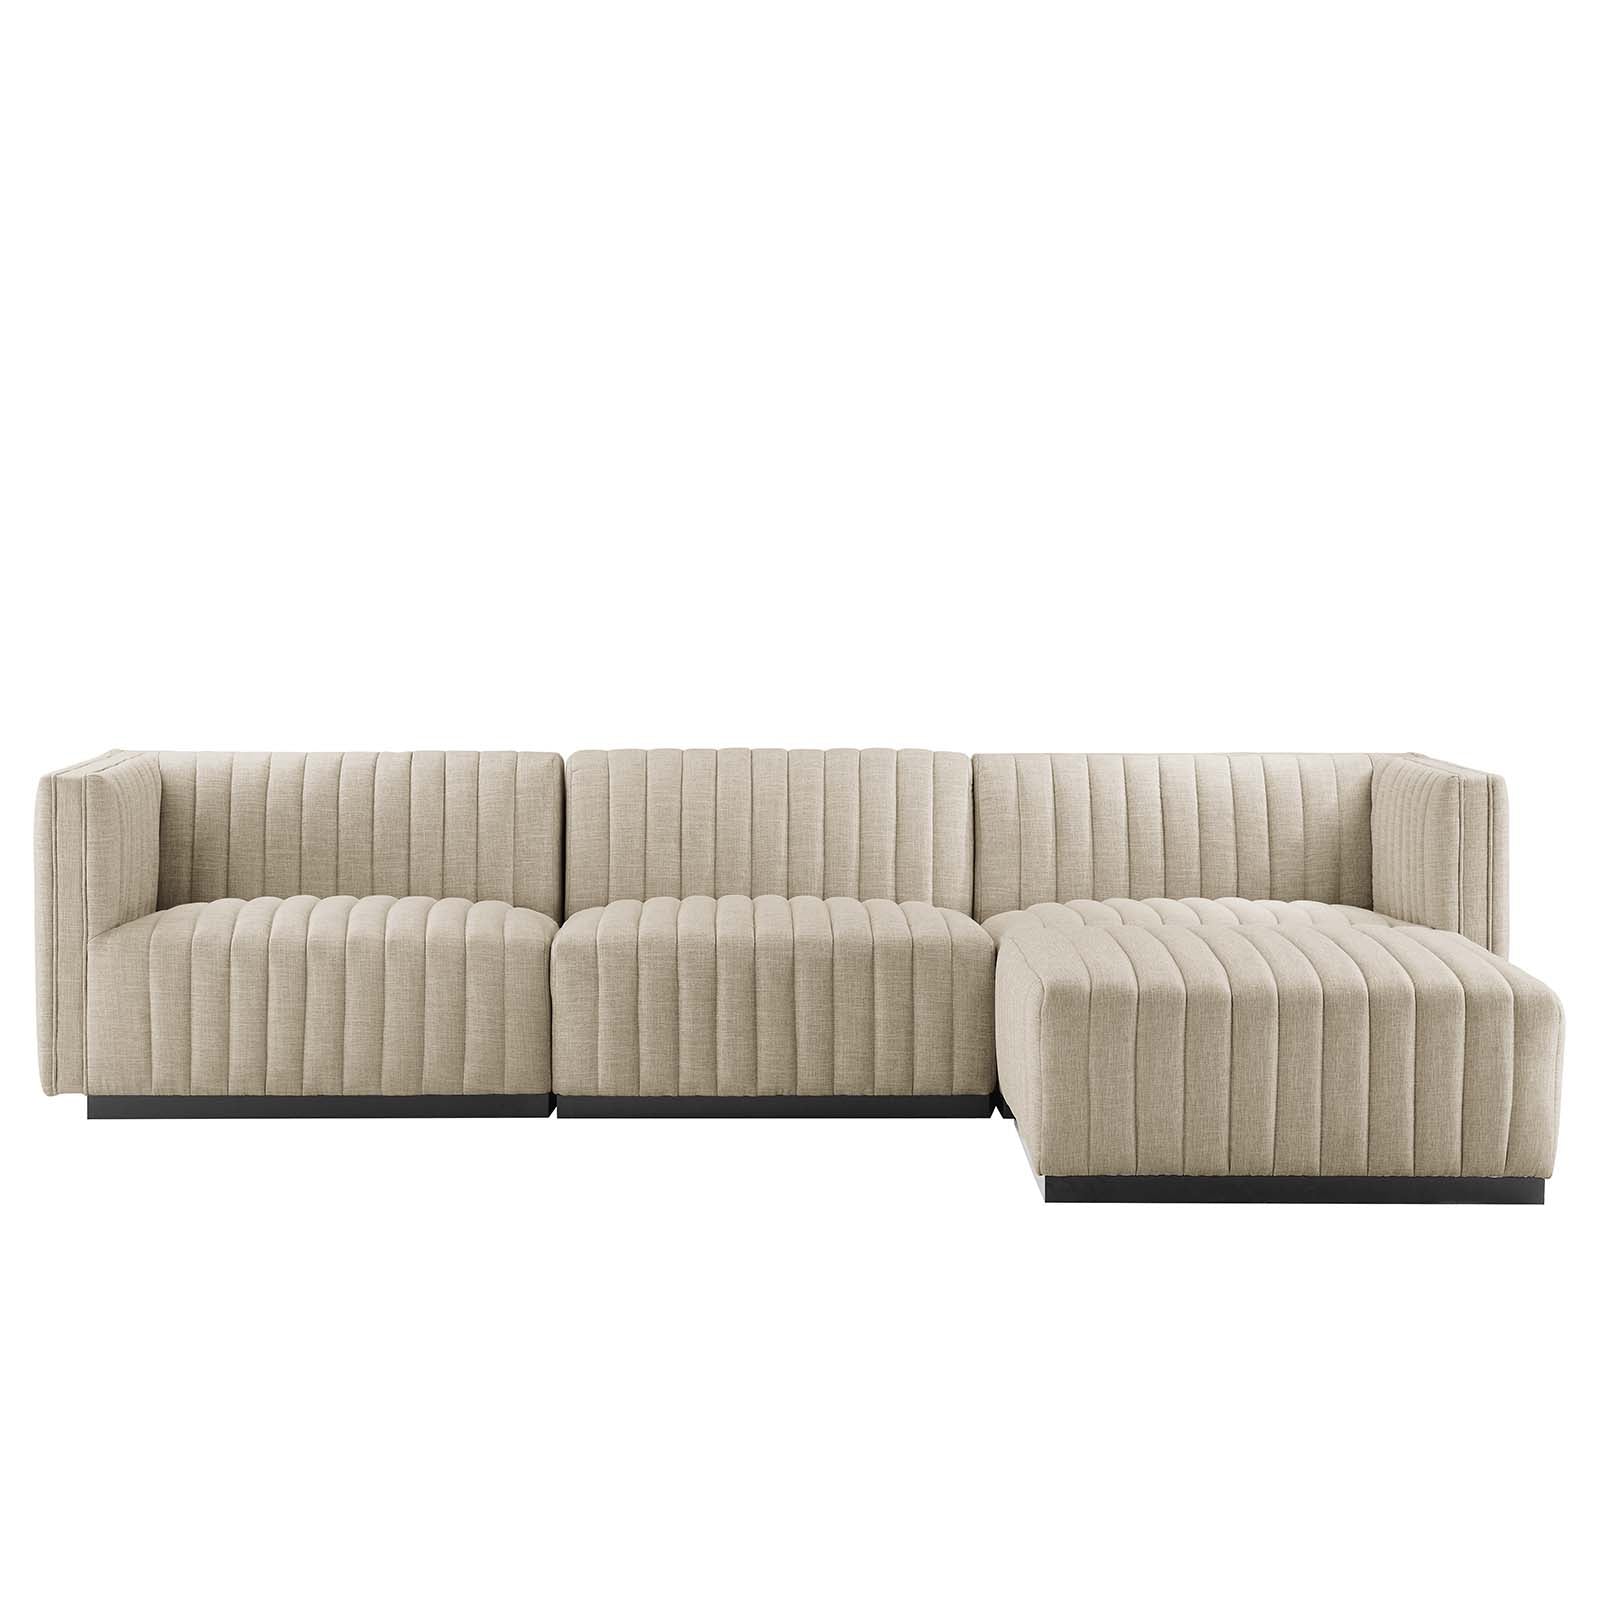 Modway Sectional Sofas - Conjure Channel Tufted Upholstered Fabric 4-Piece Sectional Sofa Black Beige